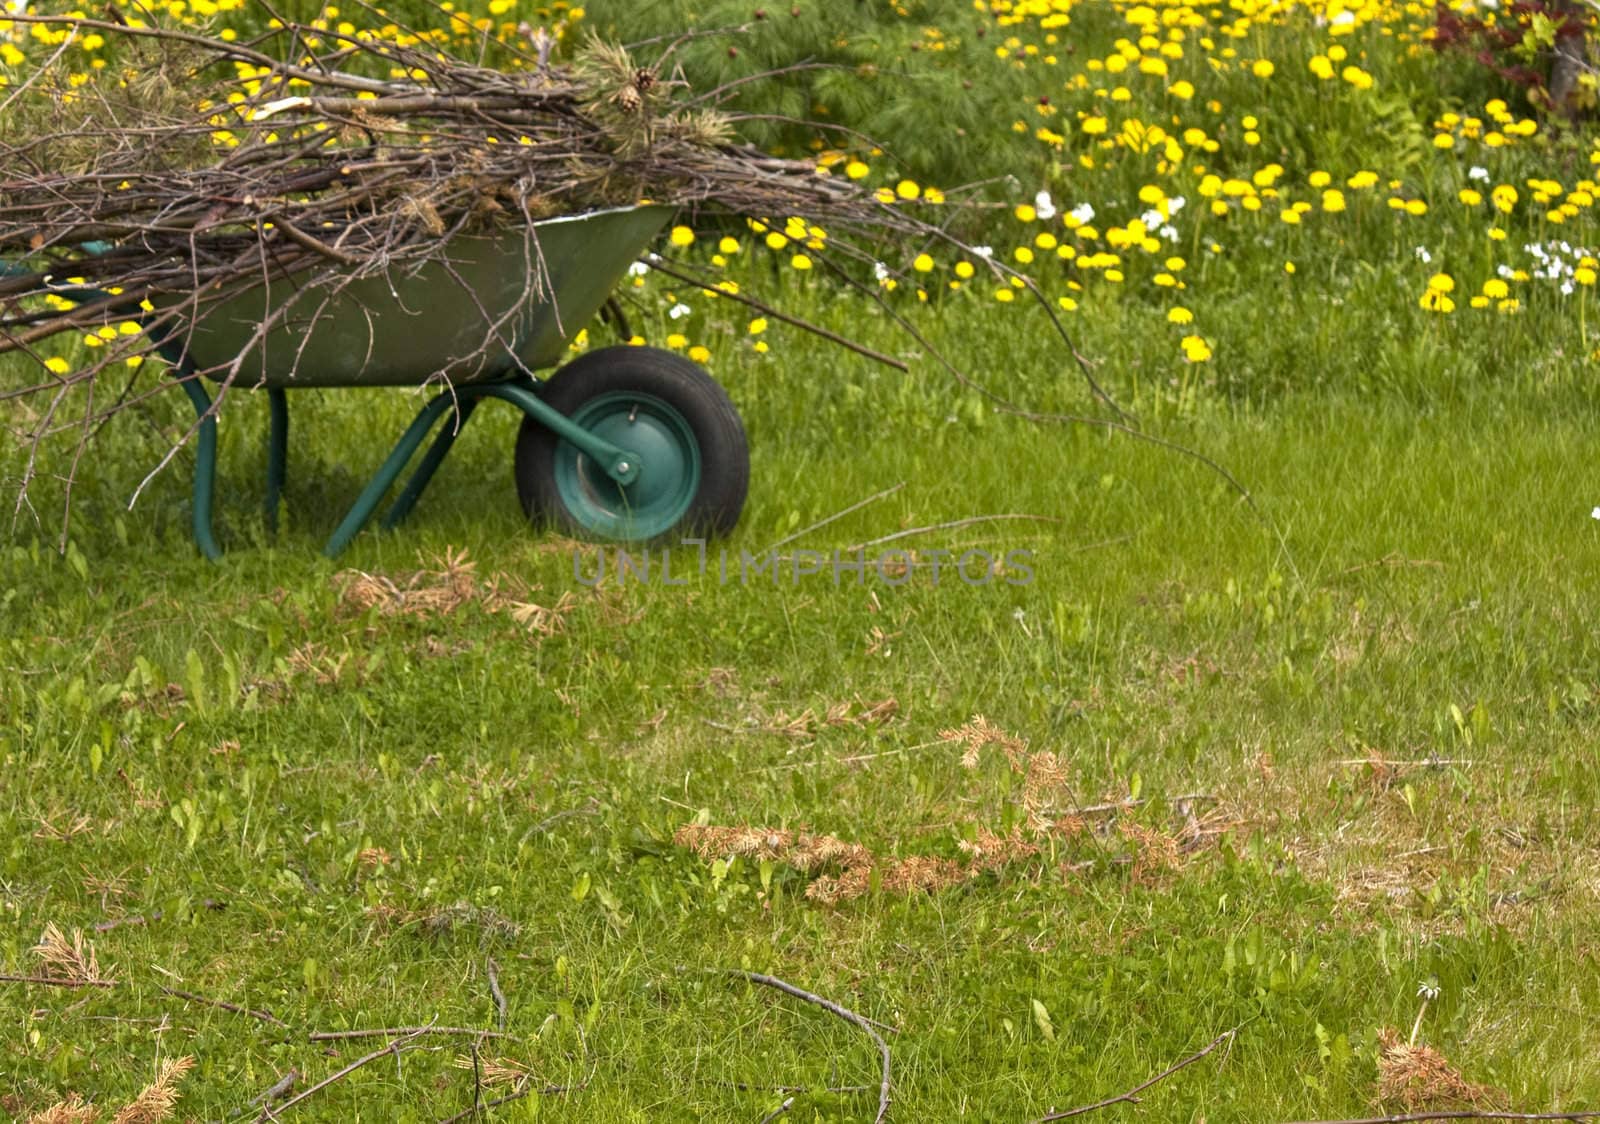 Spring cleaning in the garden, wheelbarrow full of twigs, with a dandelion background.